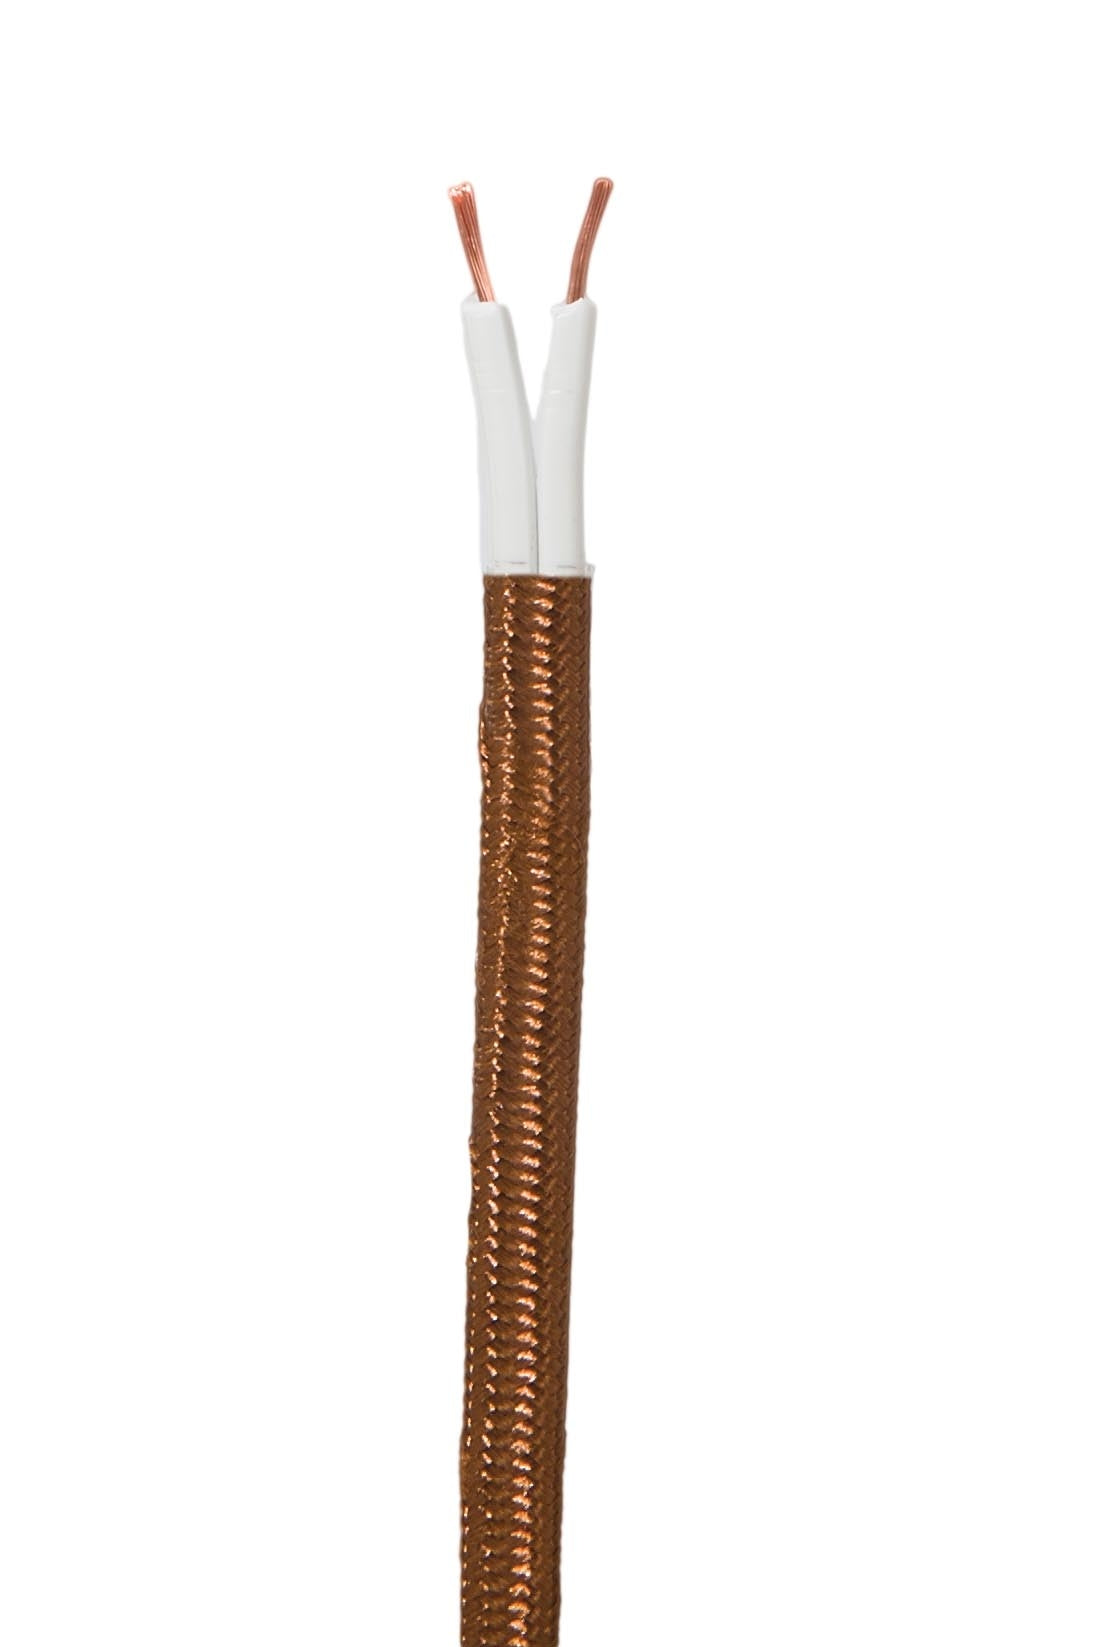 Light Brown 18 Gauge SPT-2 Fabric Parallel Lamp Cord, Choice of